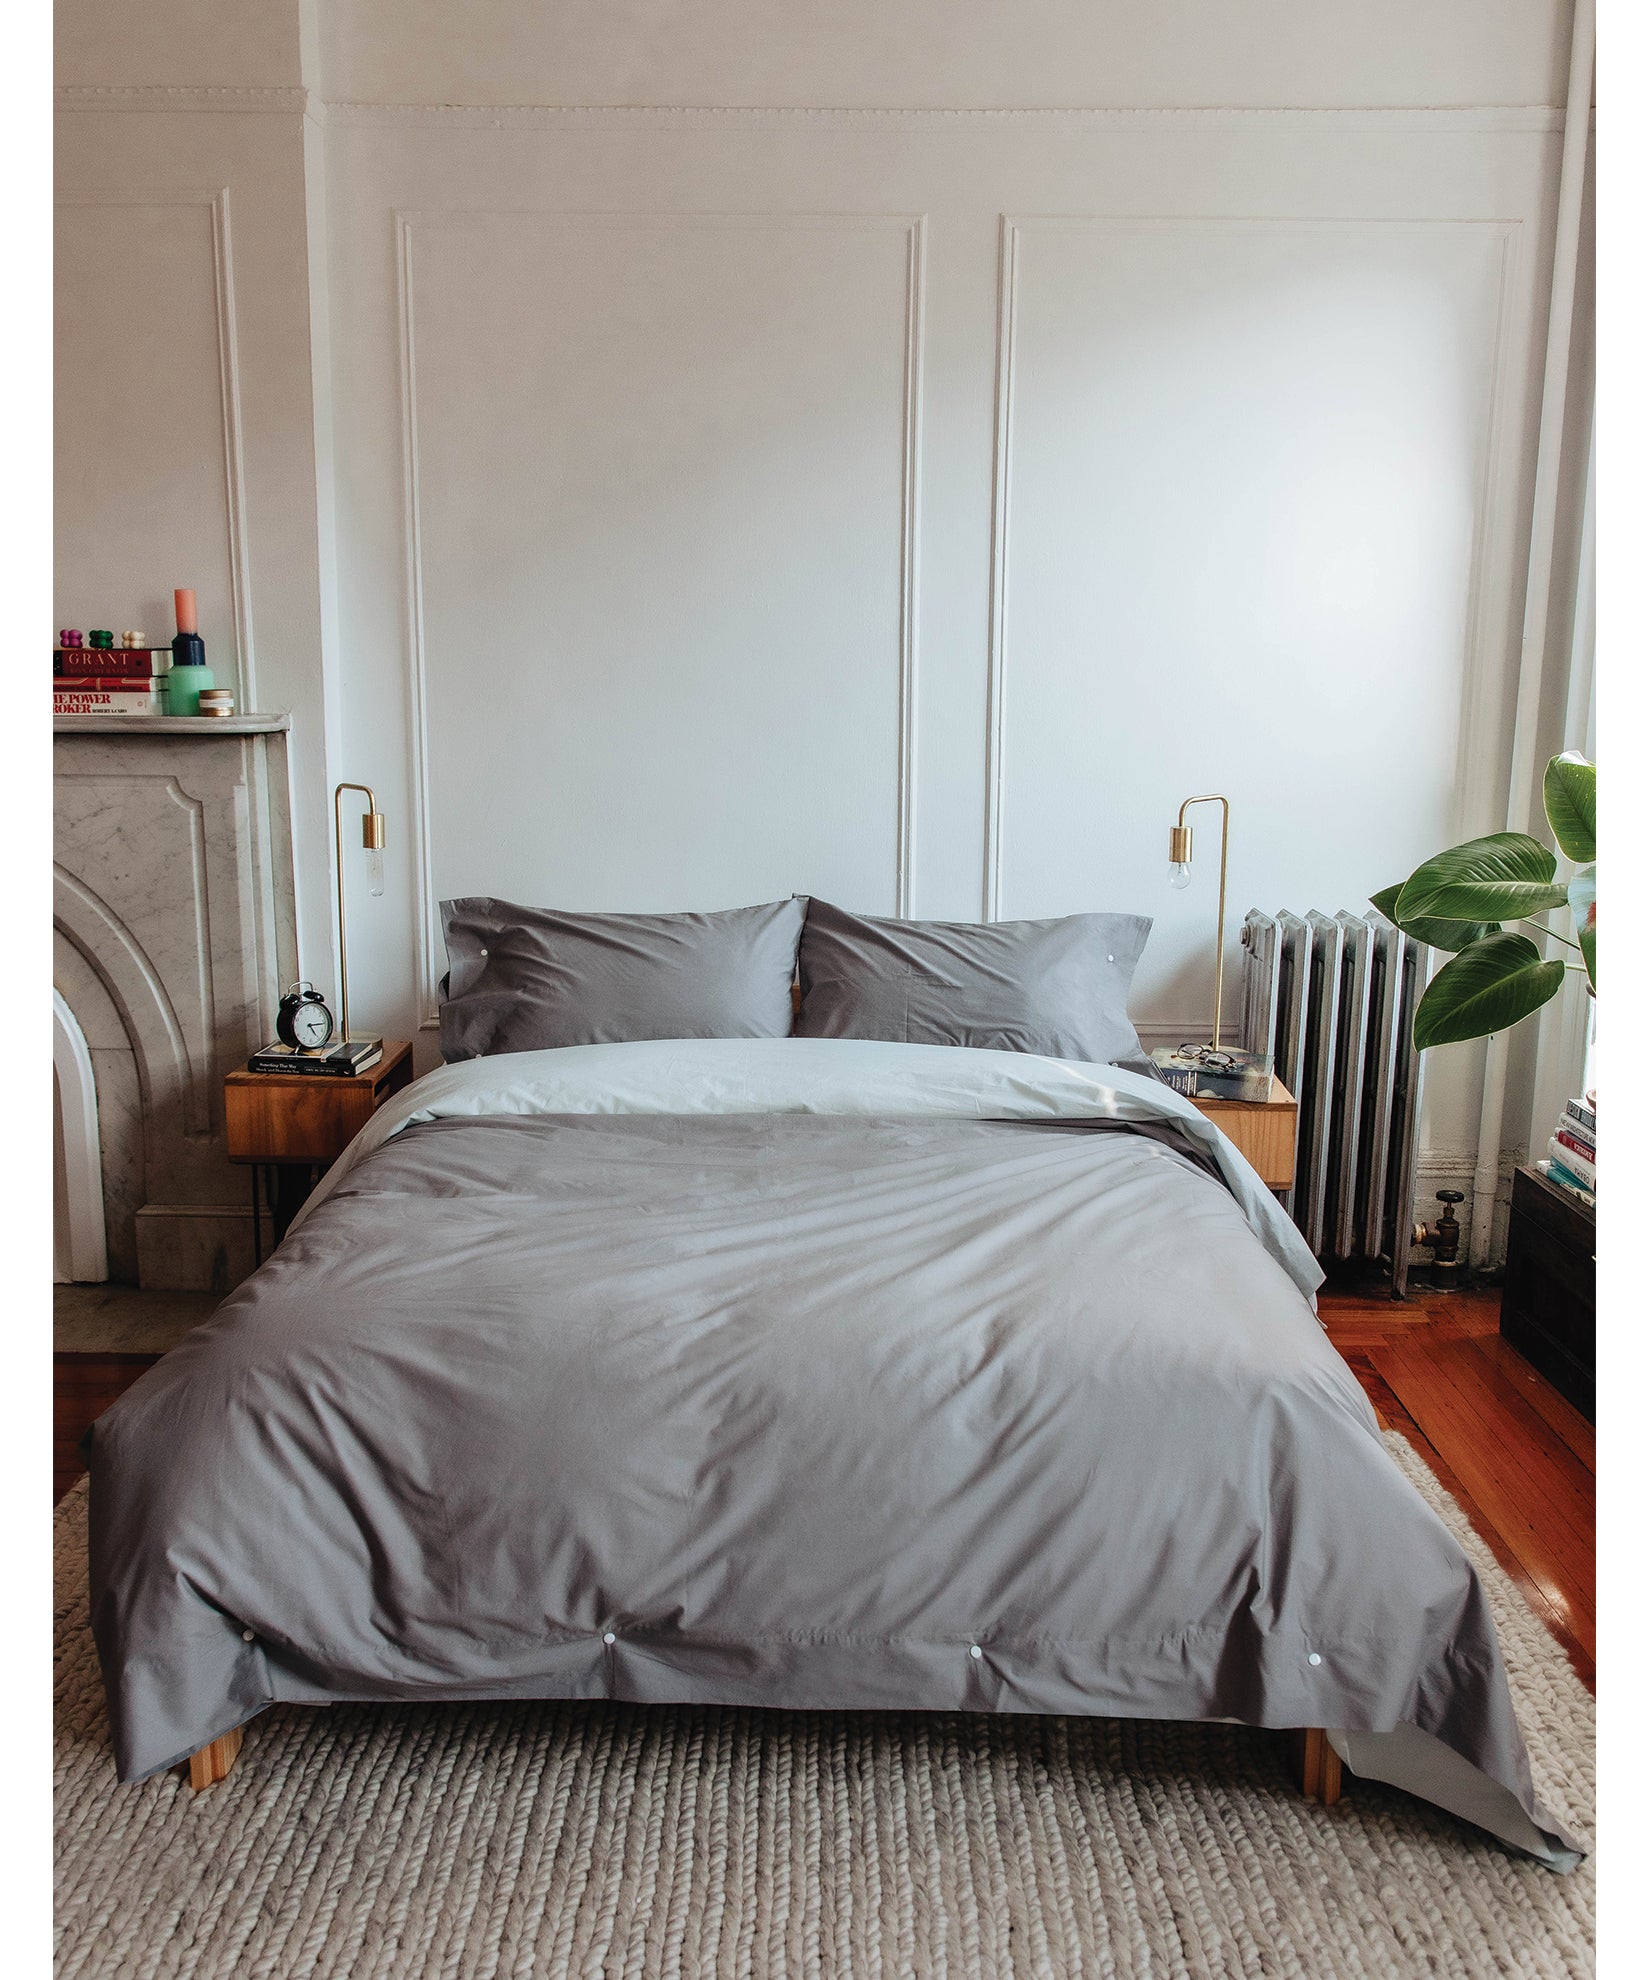 Corner Keepers Duvet Cover Snaps - Holds Your Comforter in Place All Night,  No More Shifting, Easy Iron-On Install, Strong Simple Solution, Less Bulky